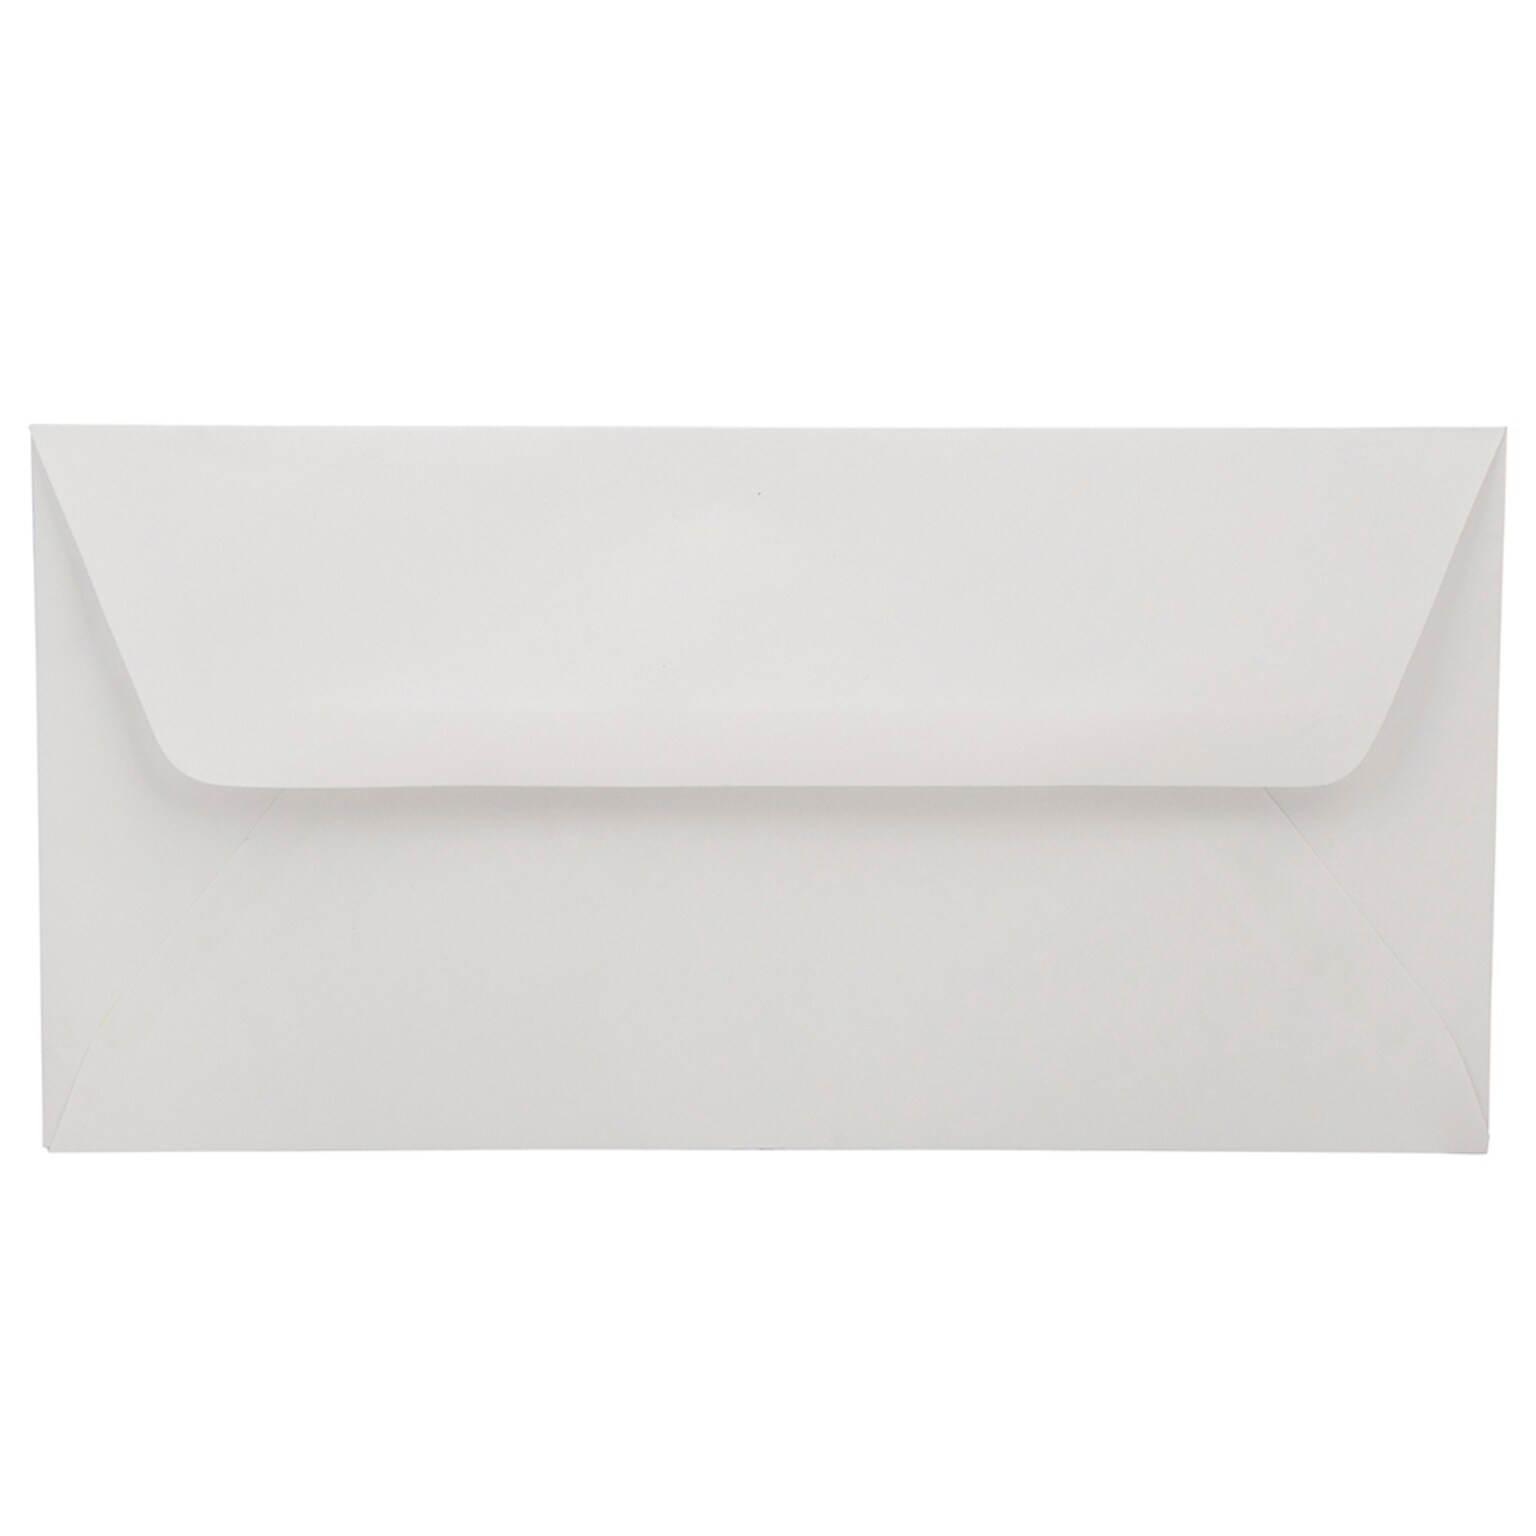 JAM Paper Open End #16 Business Envelope, 6 1/2 x 9 1/2, White, 500/Pack (1633178H)